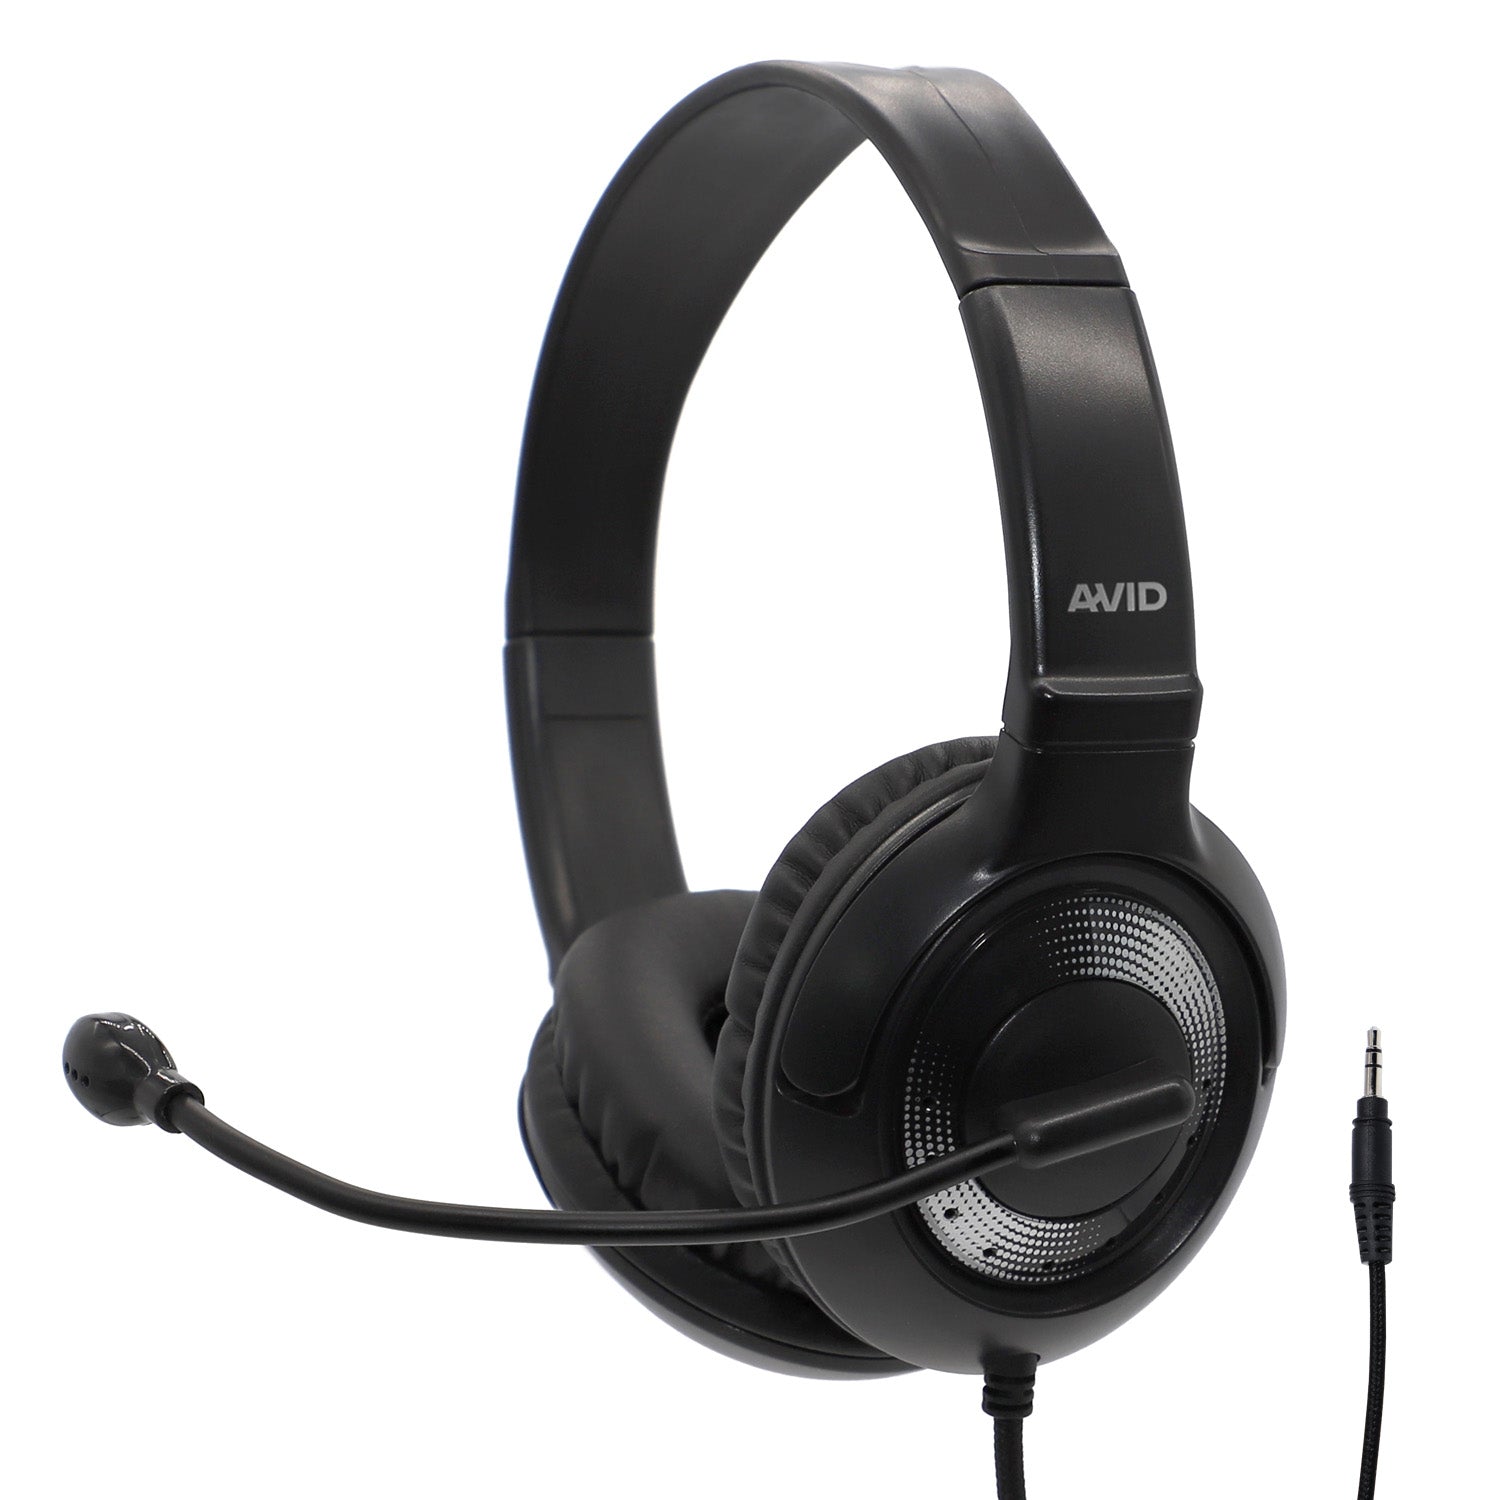 AE-55 3.5mm Headset with Boom Mic